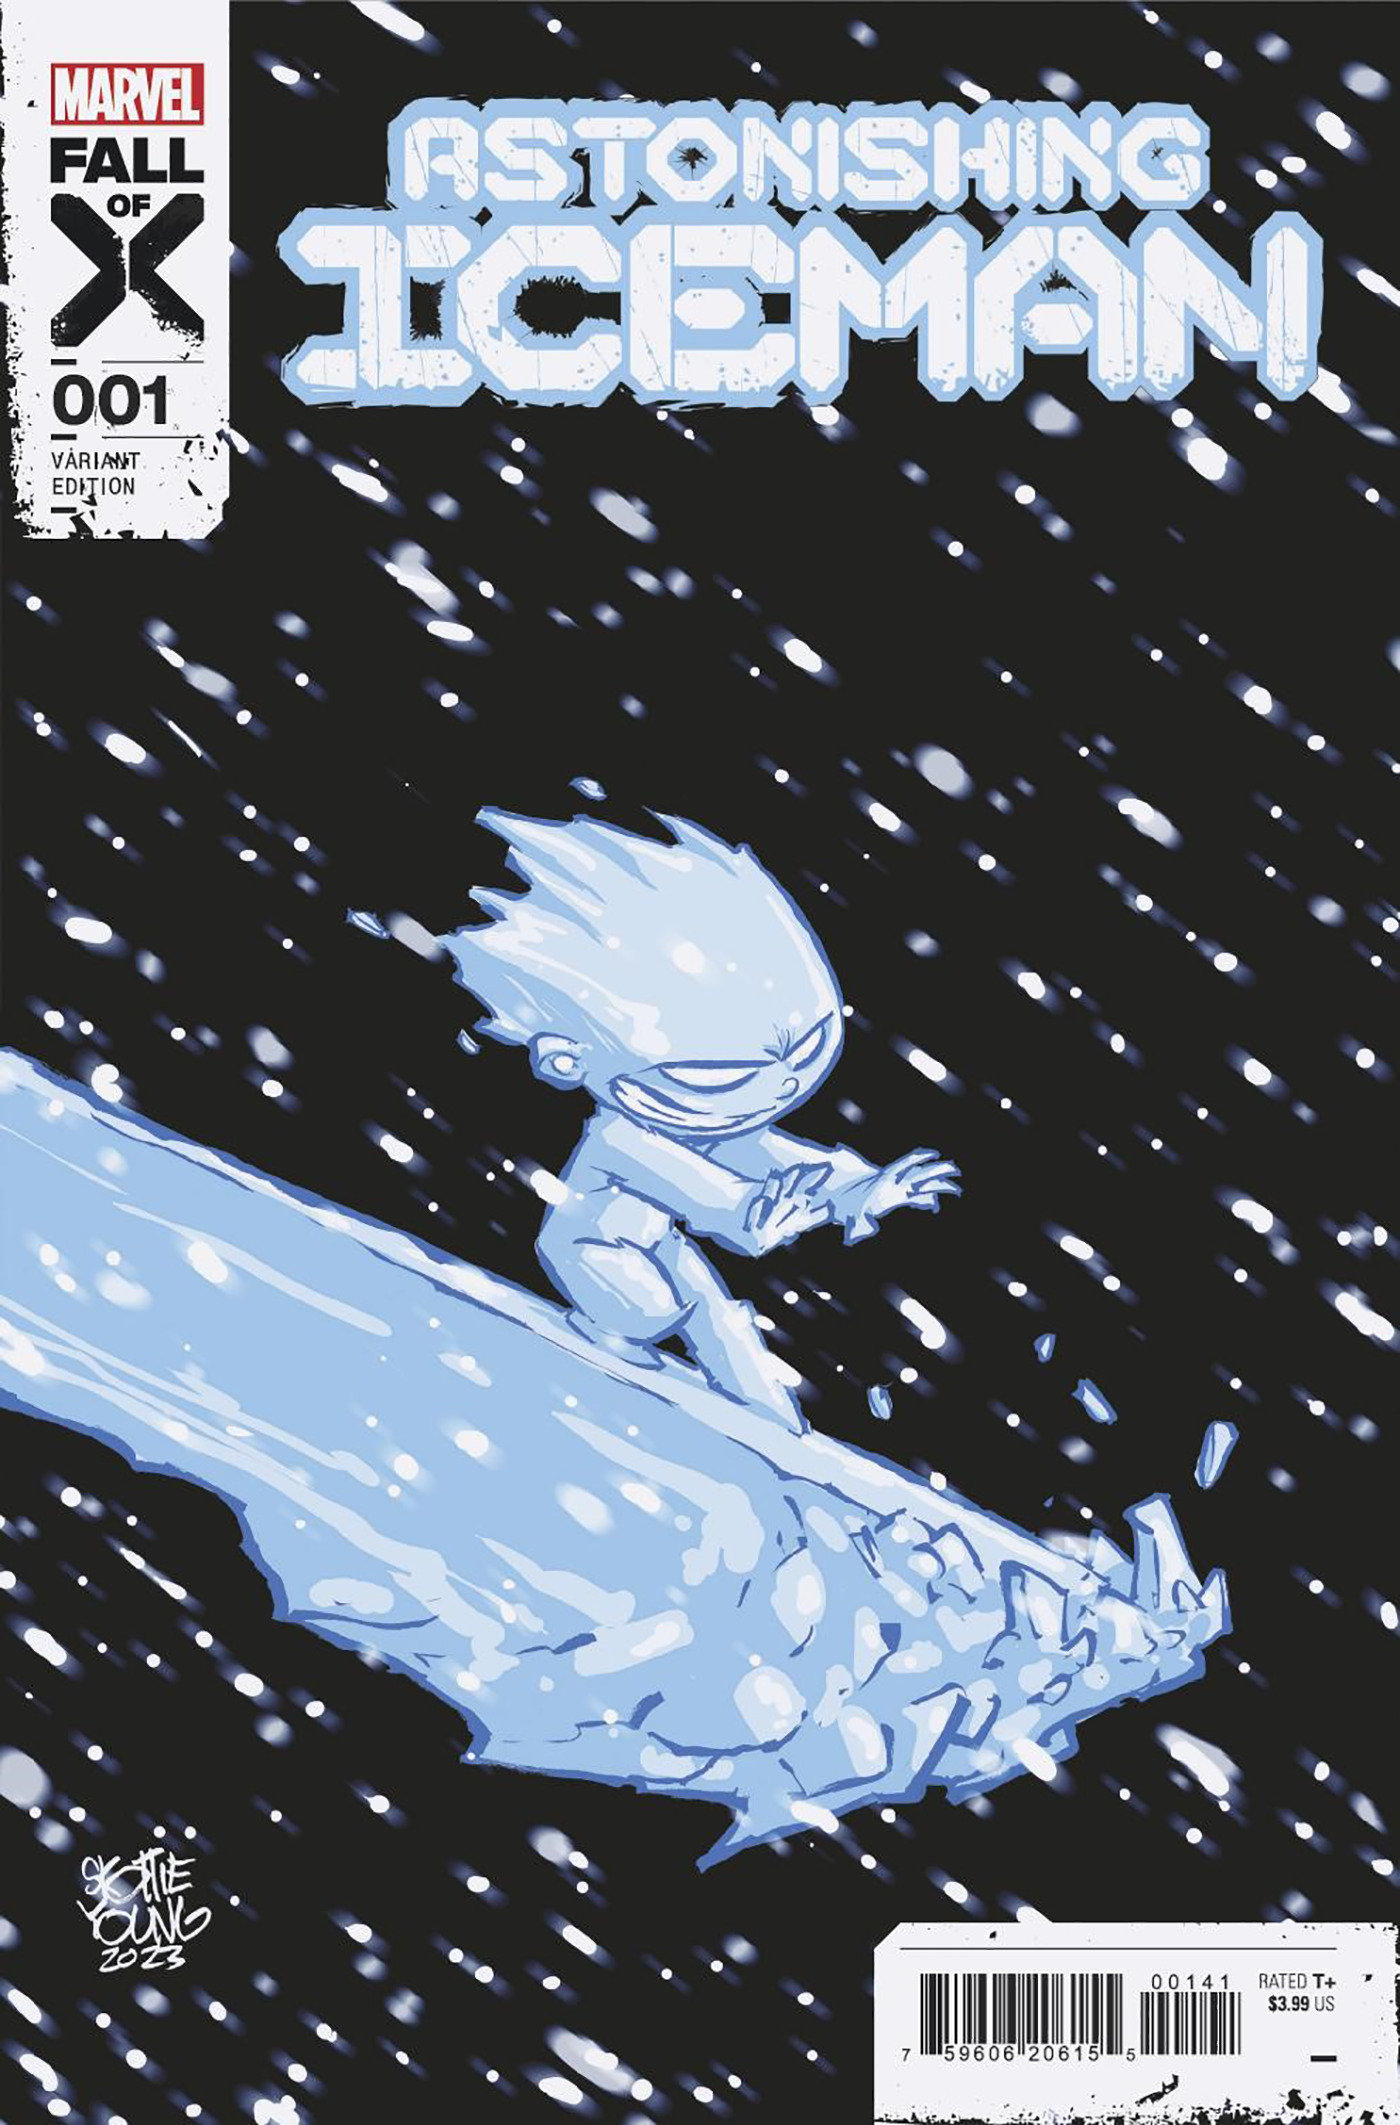 Astonishing Iceman #1 Skottie Young Variant (Fall of the X-Men)